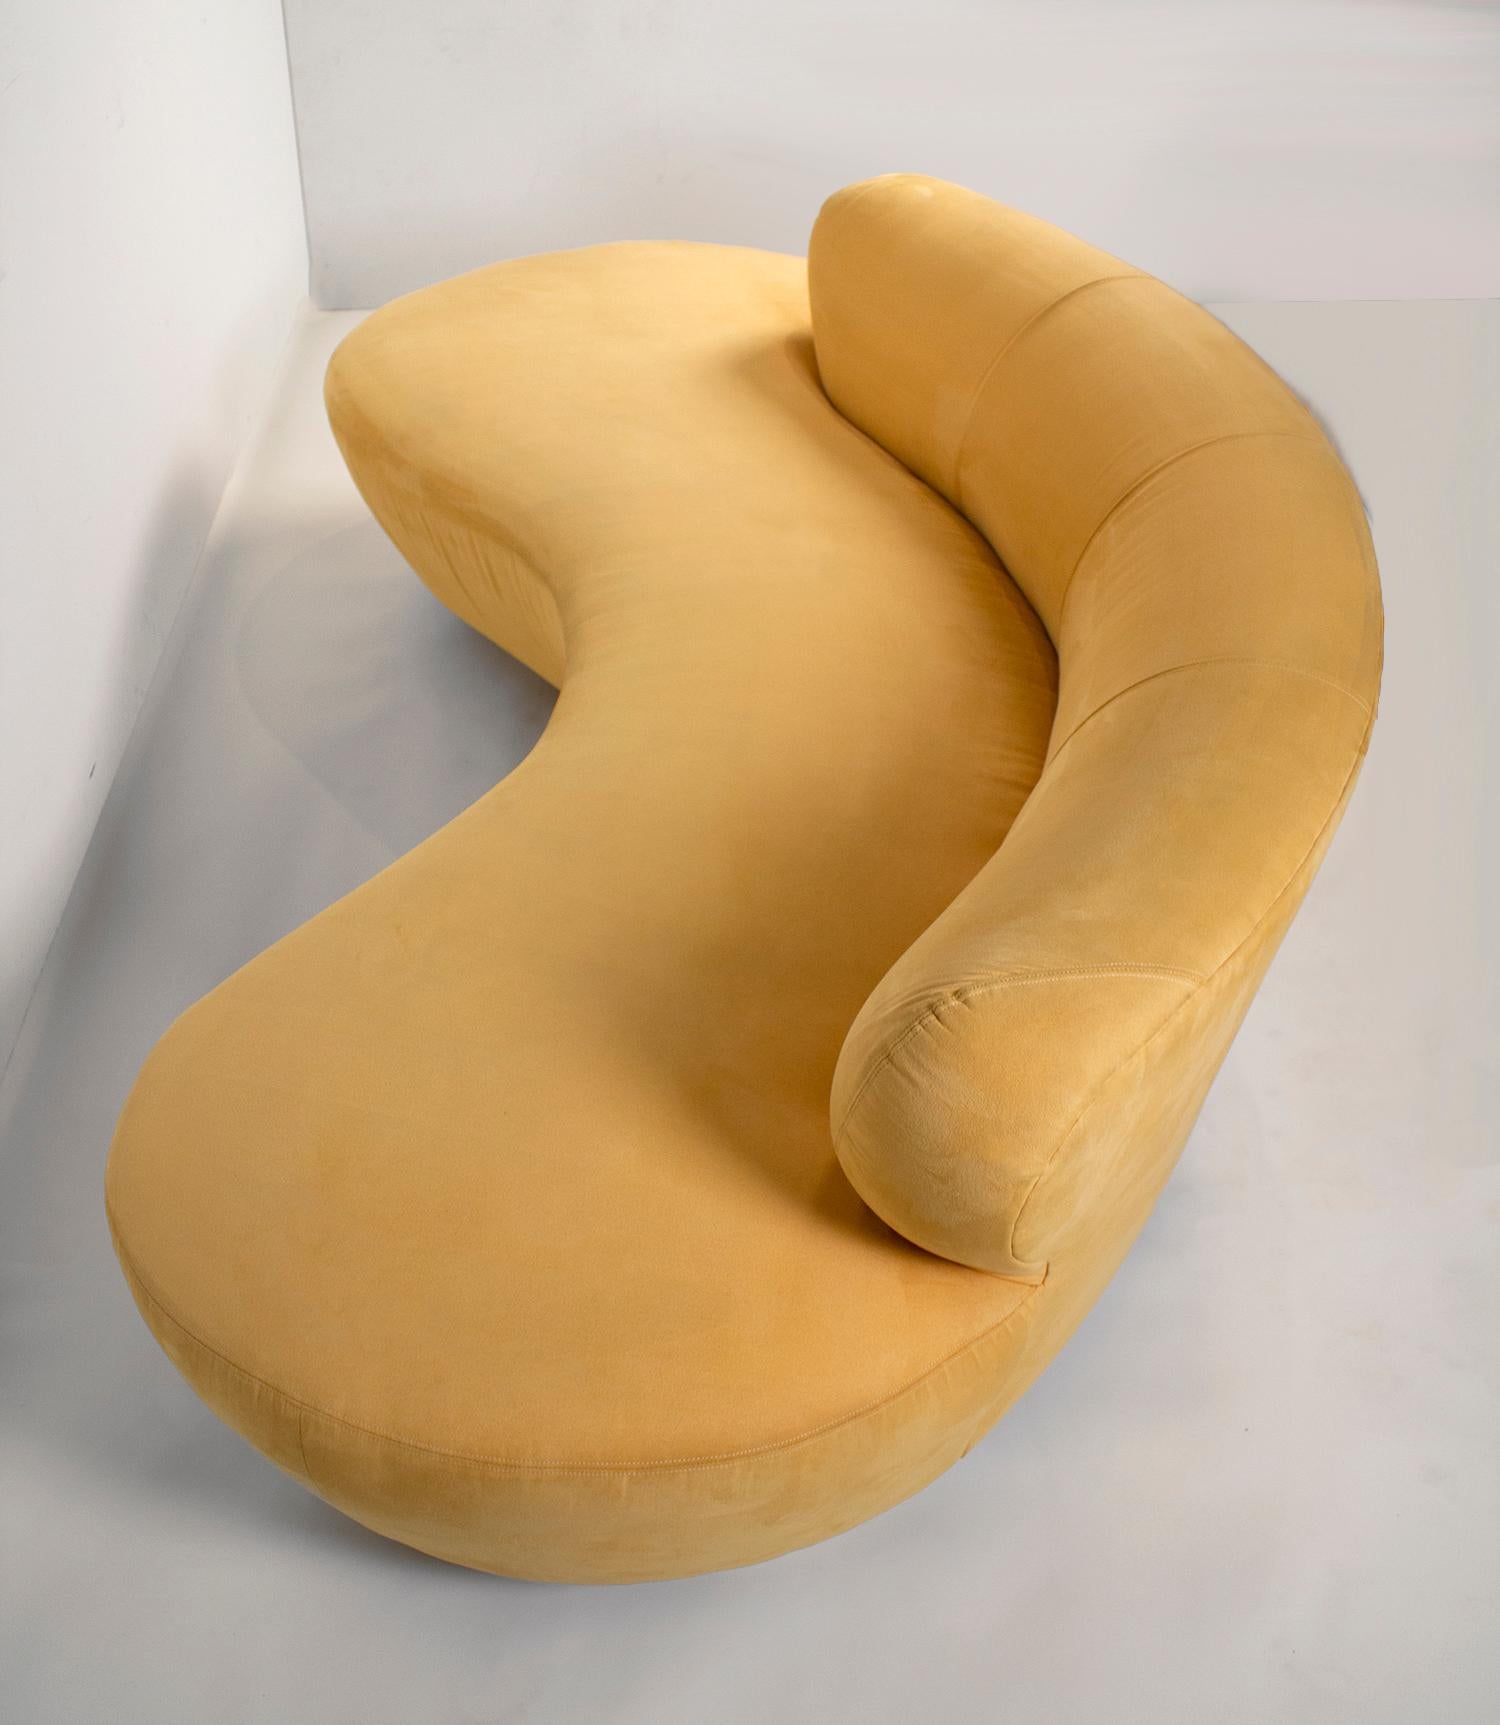 Vintage Vladimir Kagan crescent shaped cloud sofa produced for Directional with oak pedestals and acrylic center support.
The original label is still intact. The sofa retains its original buttercream Ultrasuede.